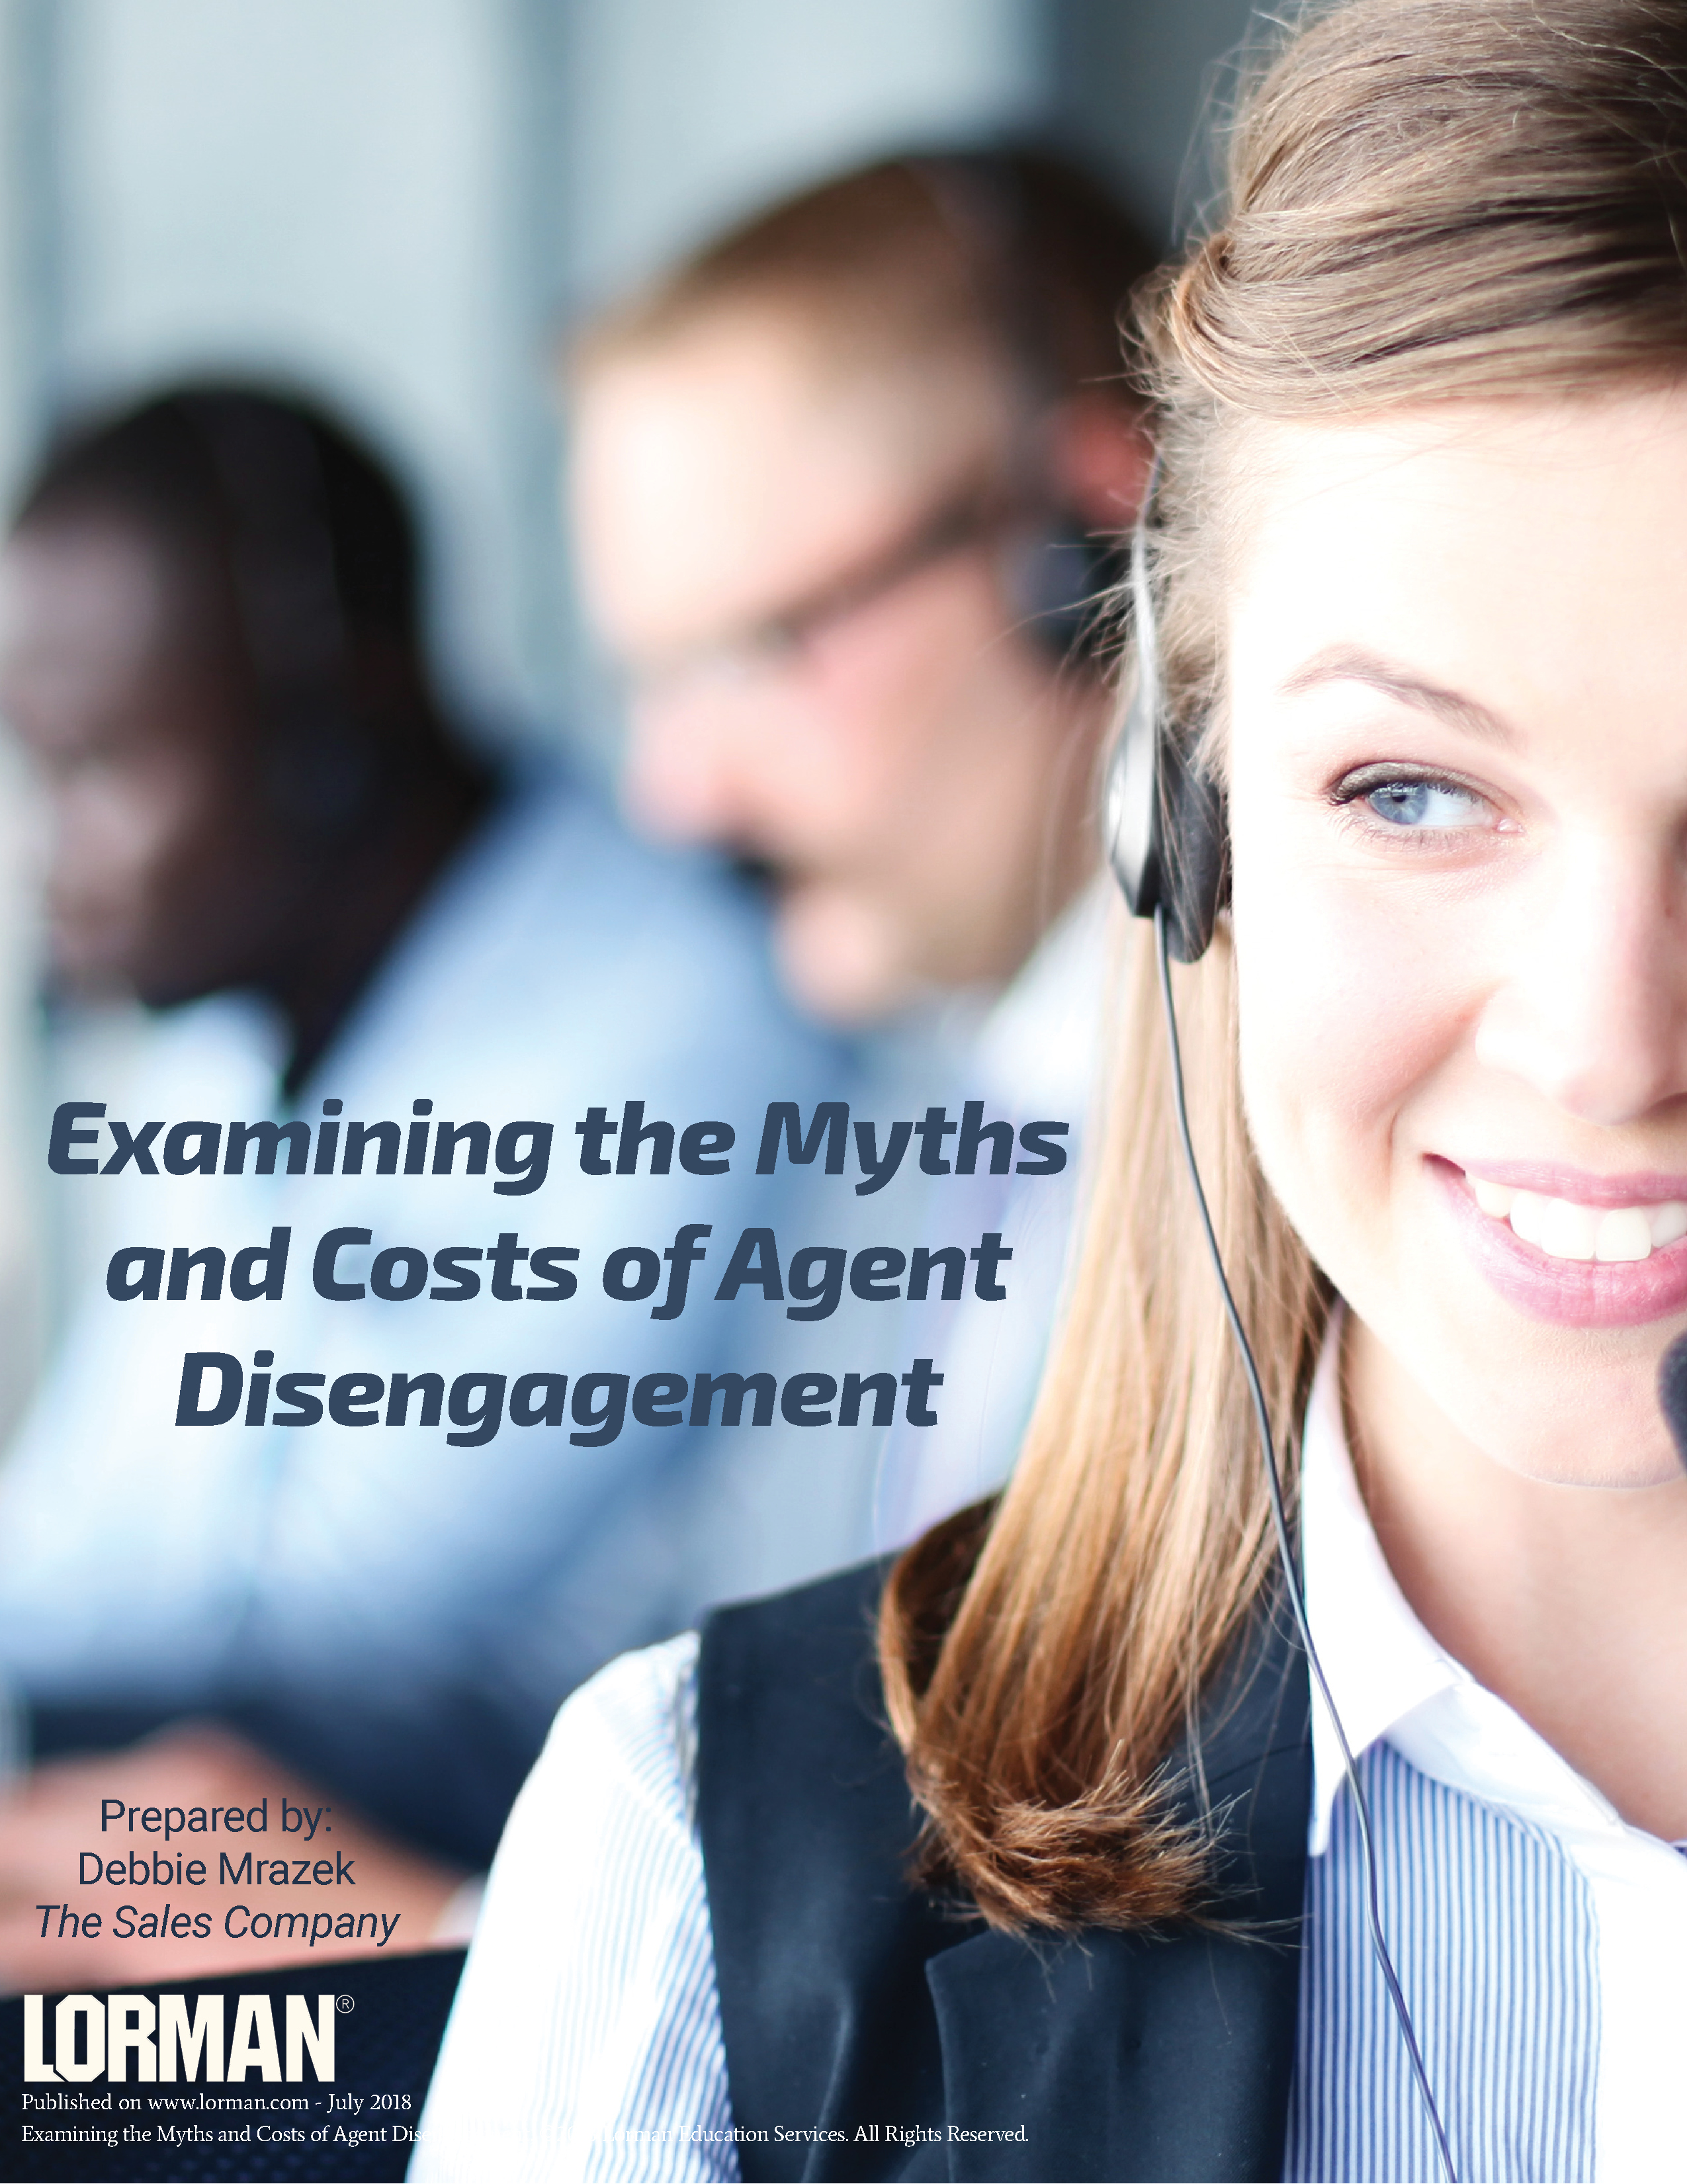 Examining the Myths and Costs of Agent Disengagement